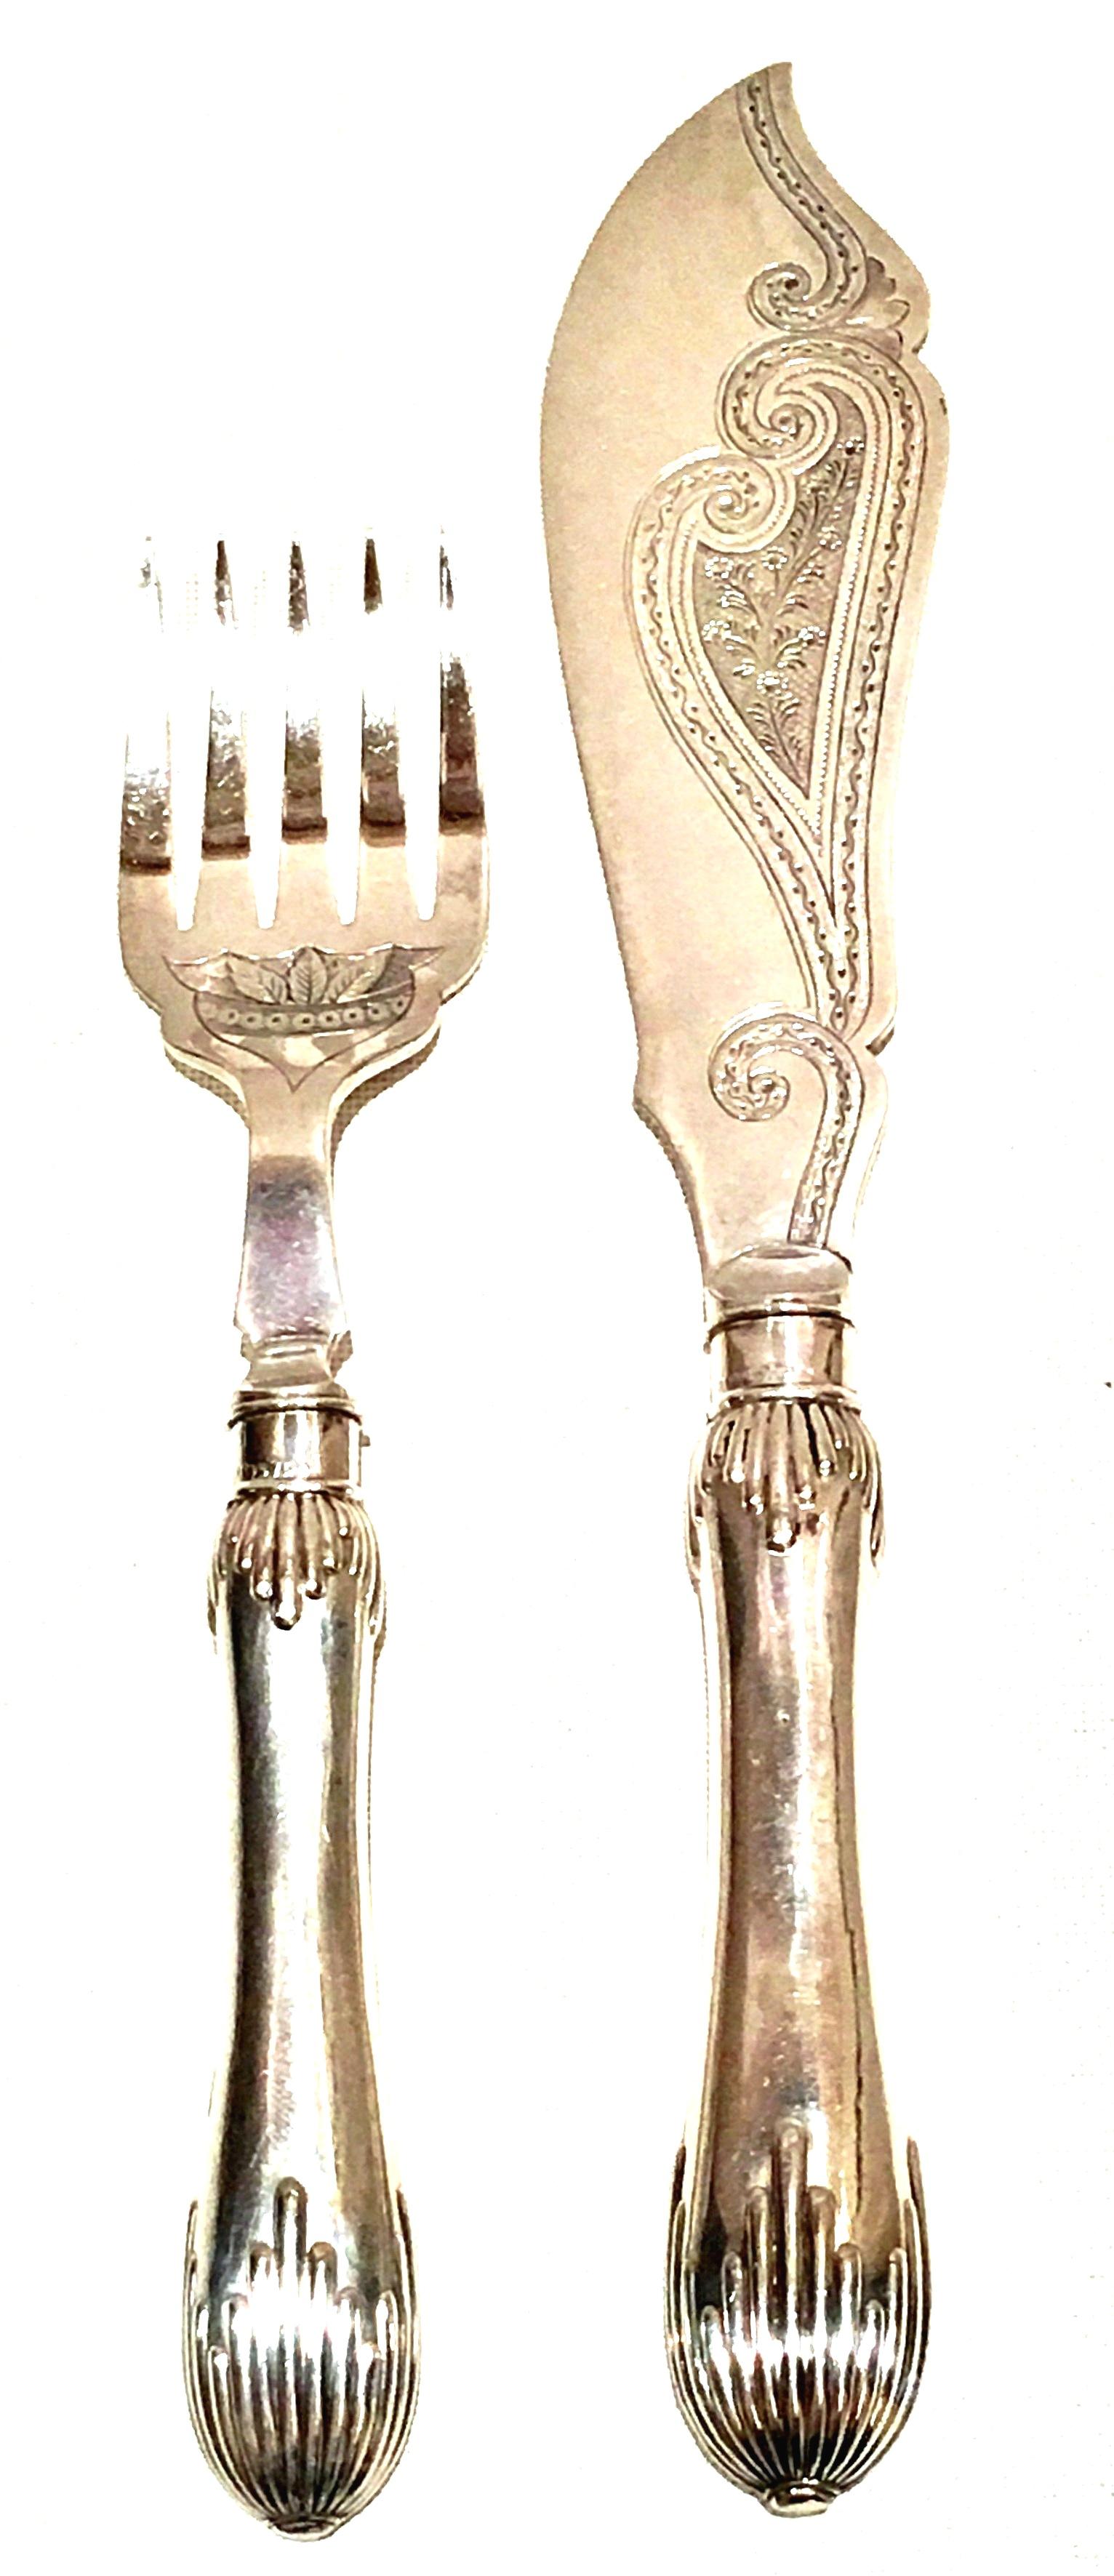 1920'S Sheffield England Silver Plate Art Deco fish serving fork and knife, two-piece set. Silver plate hallmarks by, Joseph Elliot & Sons, Sheffield England. Pattern of scroll and leaf engraved on knife blade and raised detail on handles. Fork